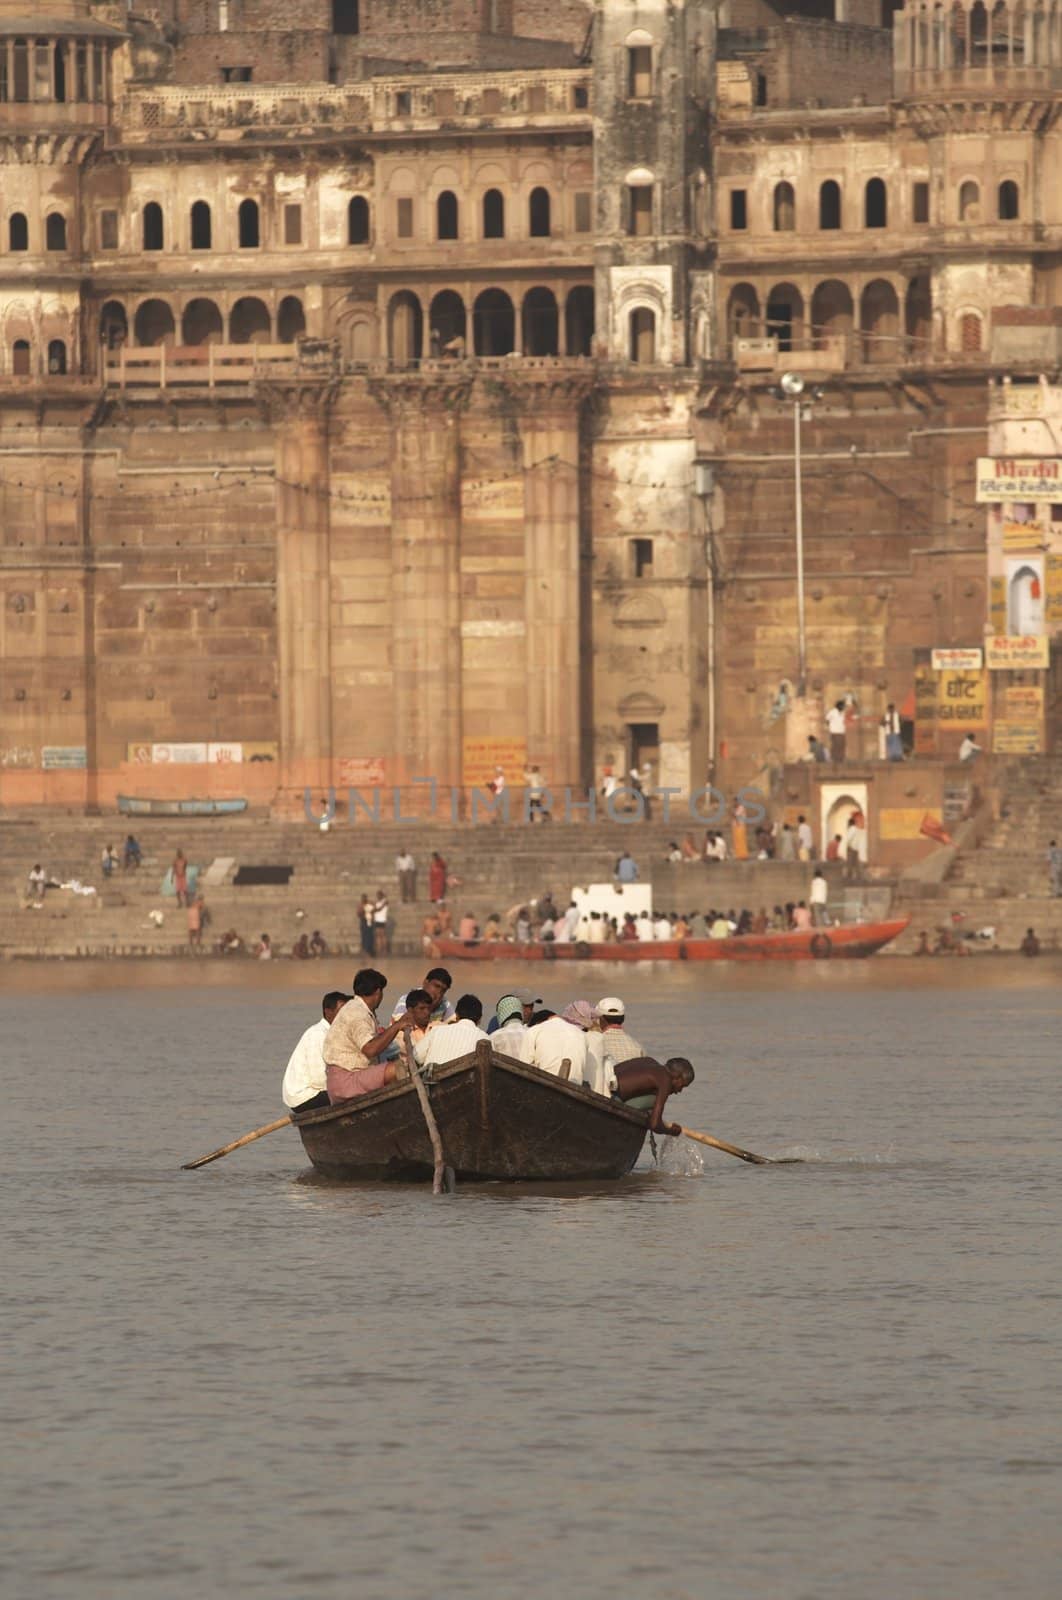 Boat full of people being rowed across the Ganges River at Varanasi, India